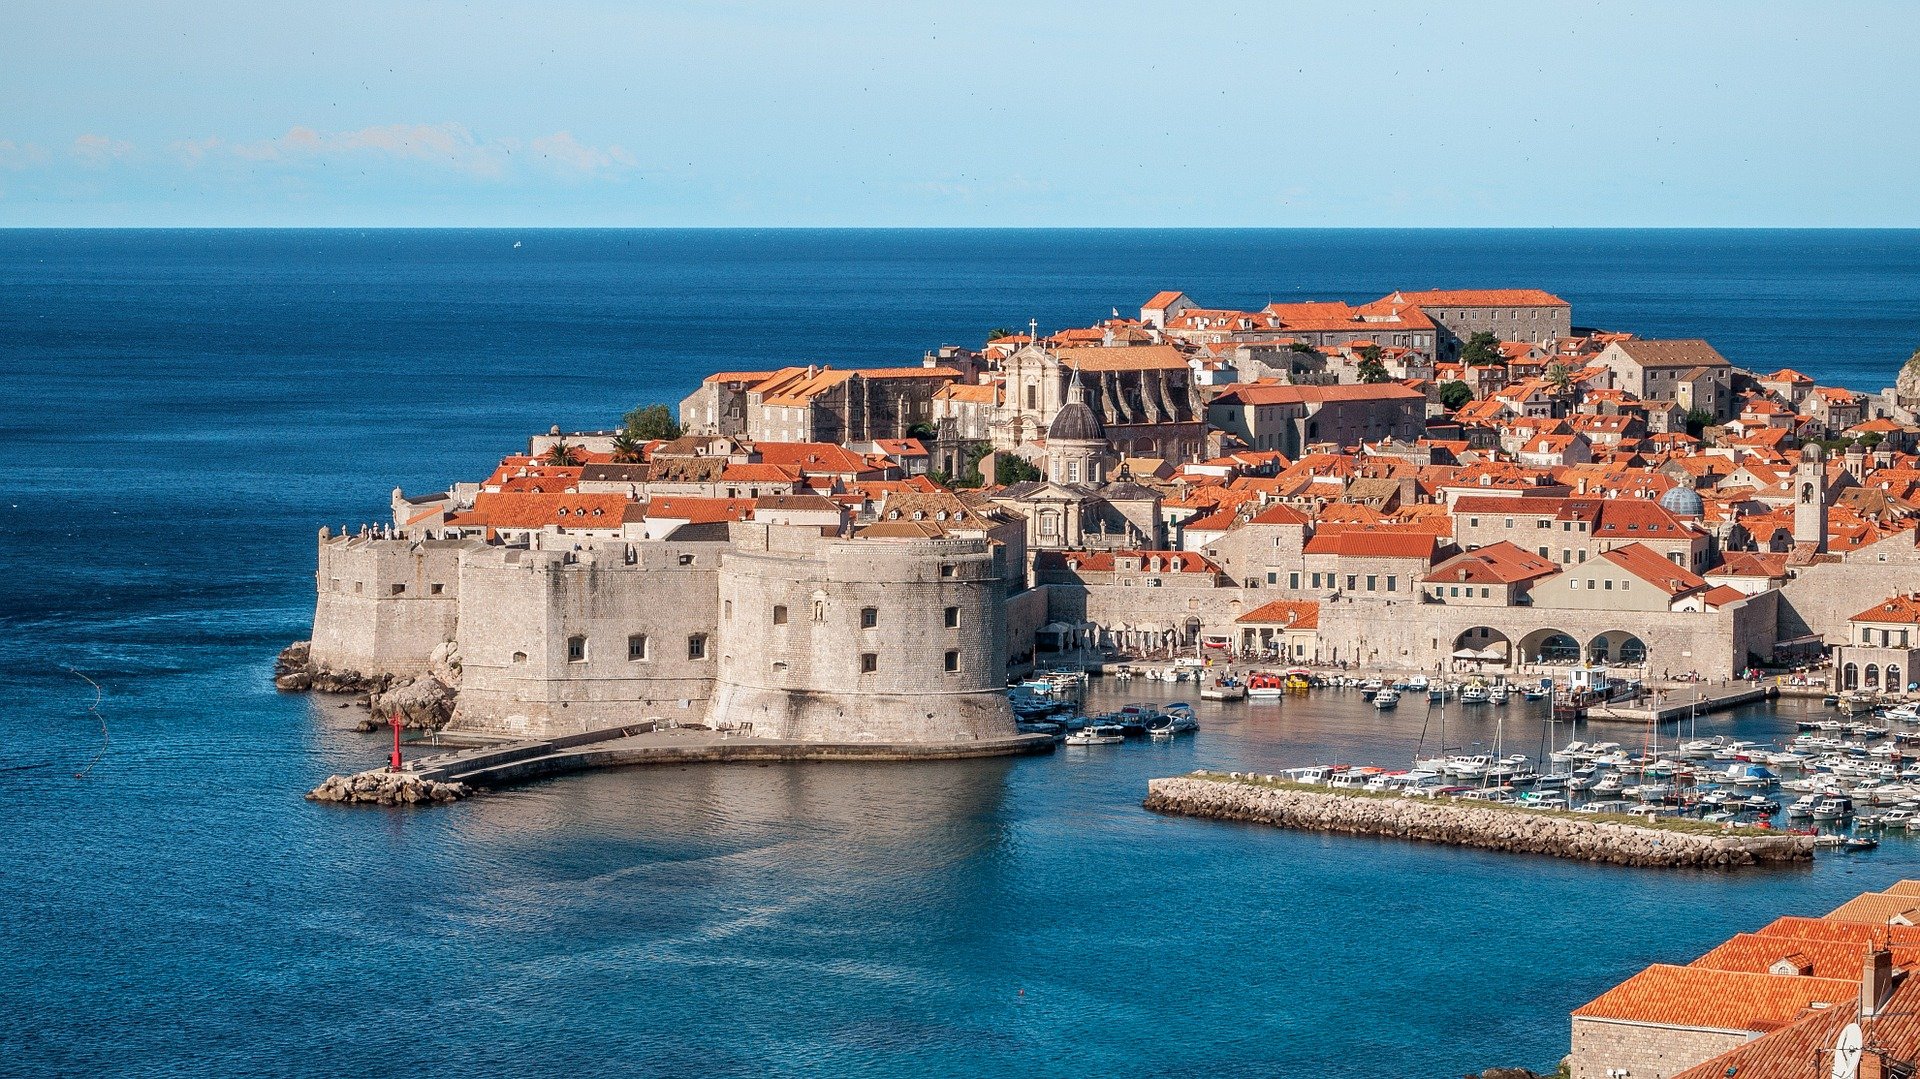 Dubrovnik next to the water